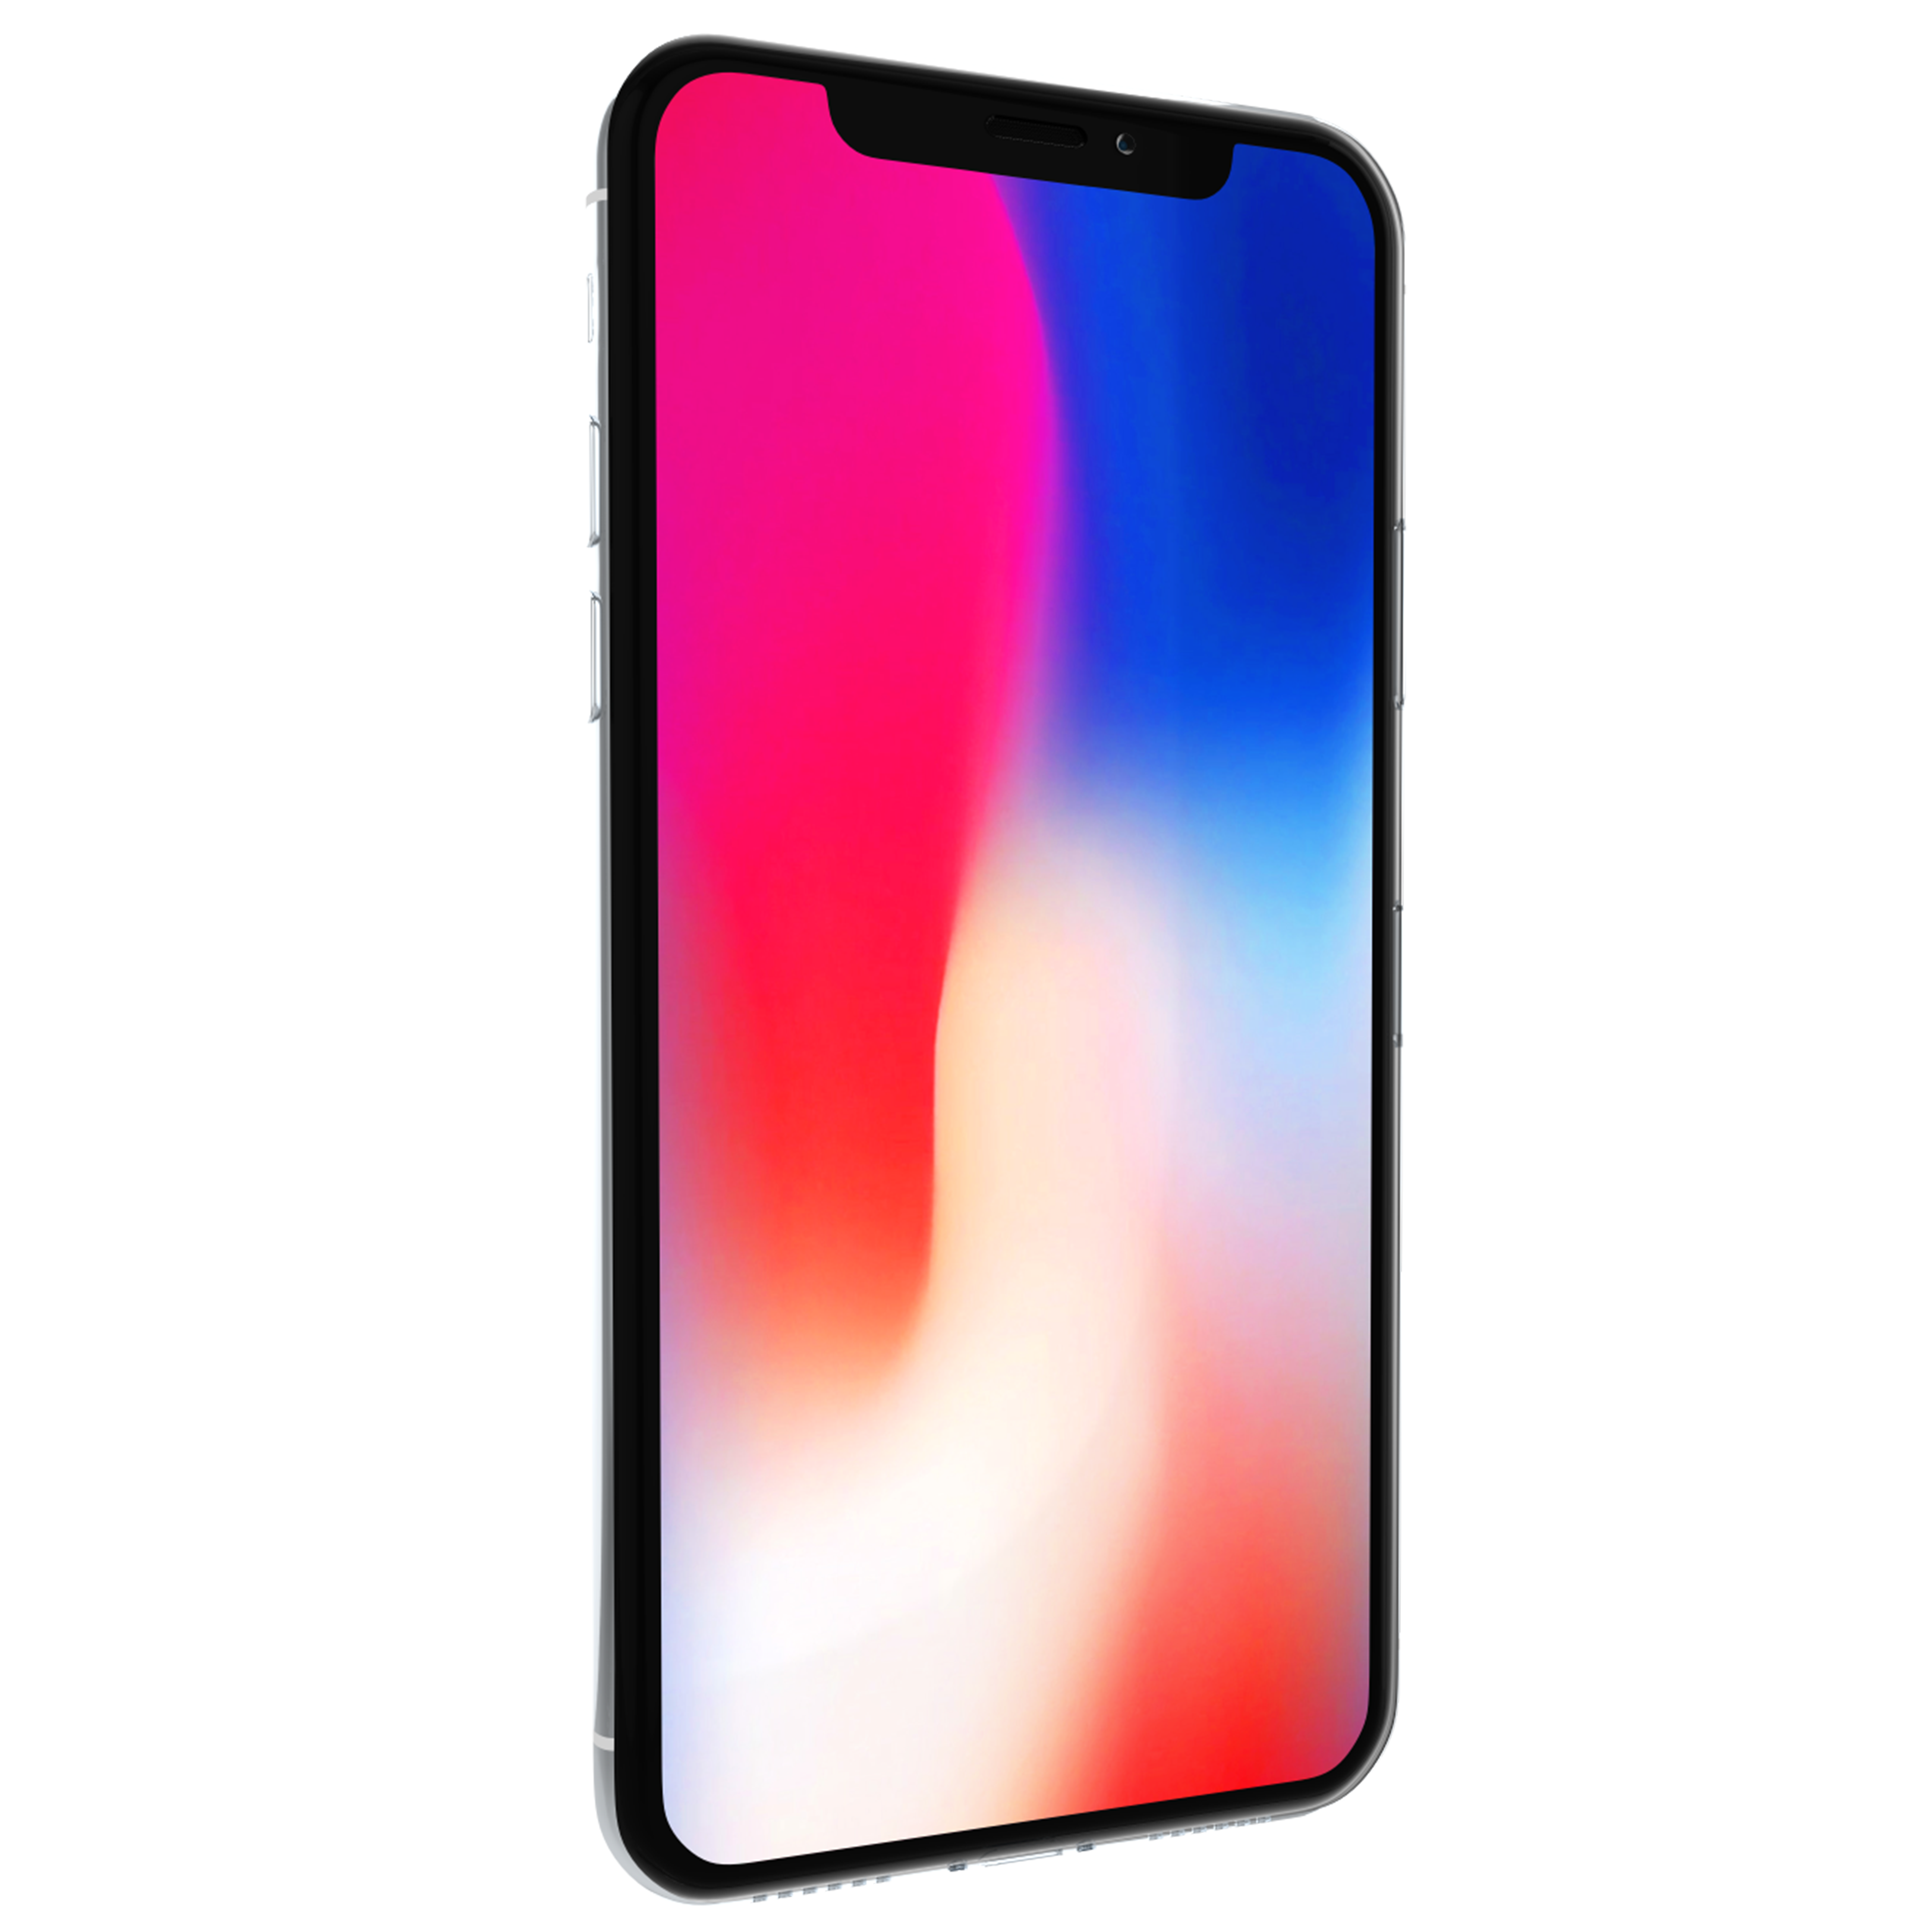 Download Apple iPhone X PNG Image for Free